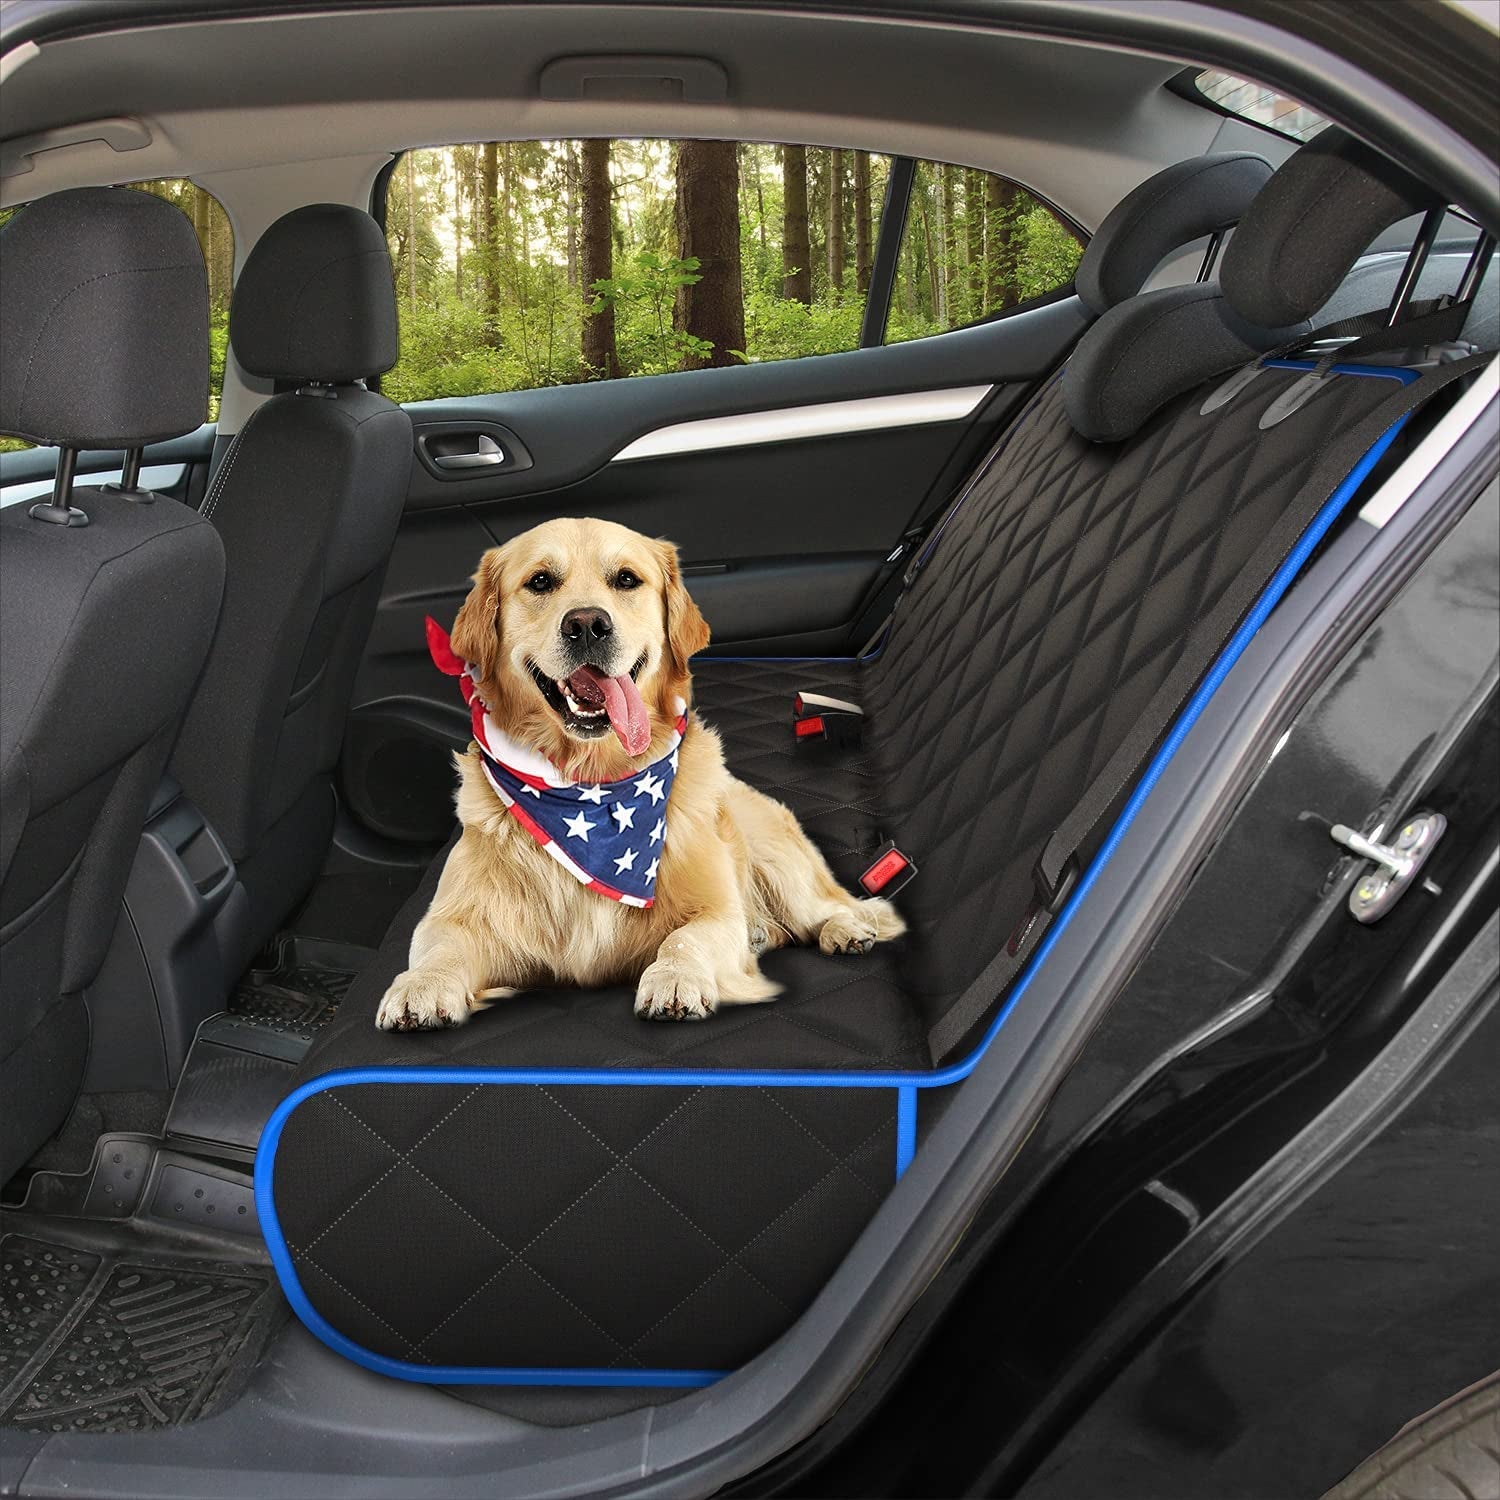 Fabric Car Bench Dog Seat Cover for Back Seat, Waterproof Vehicle Seat Covers, Durable Scratch Proof Nonslip, Protector for Pet Fur & Mud, Washable - Blue - PETGS